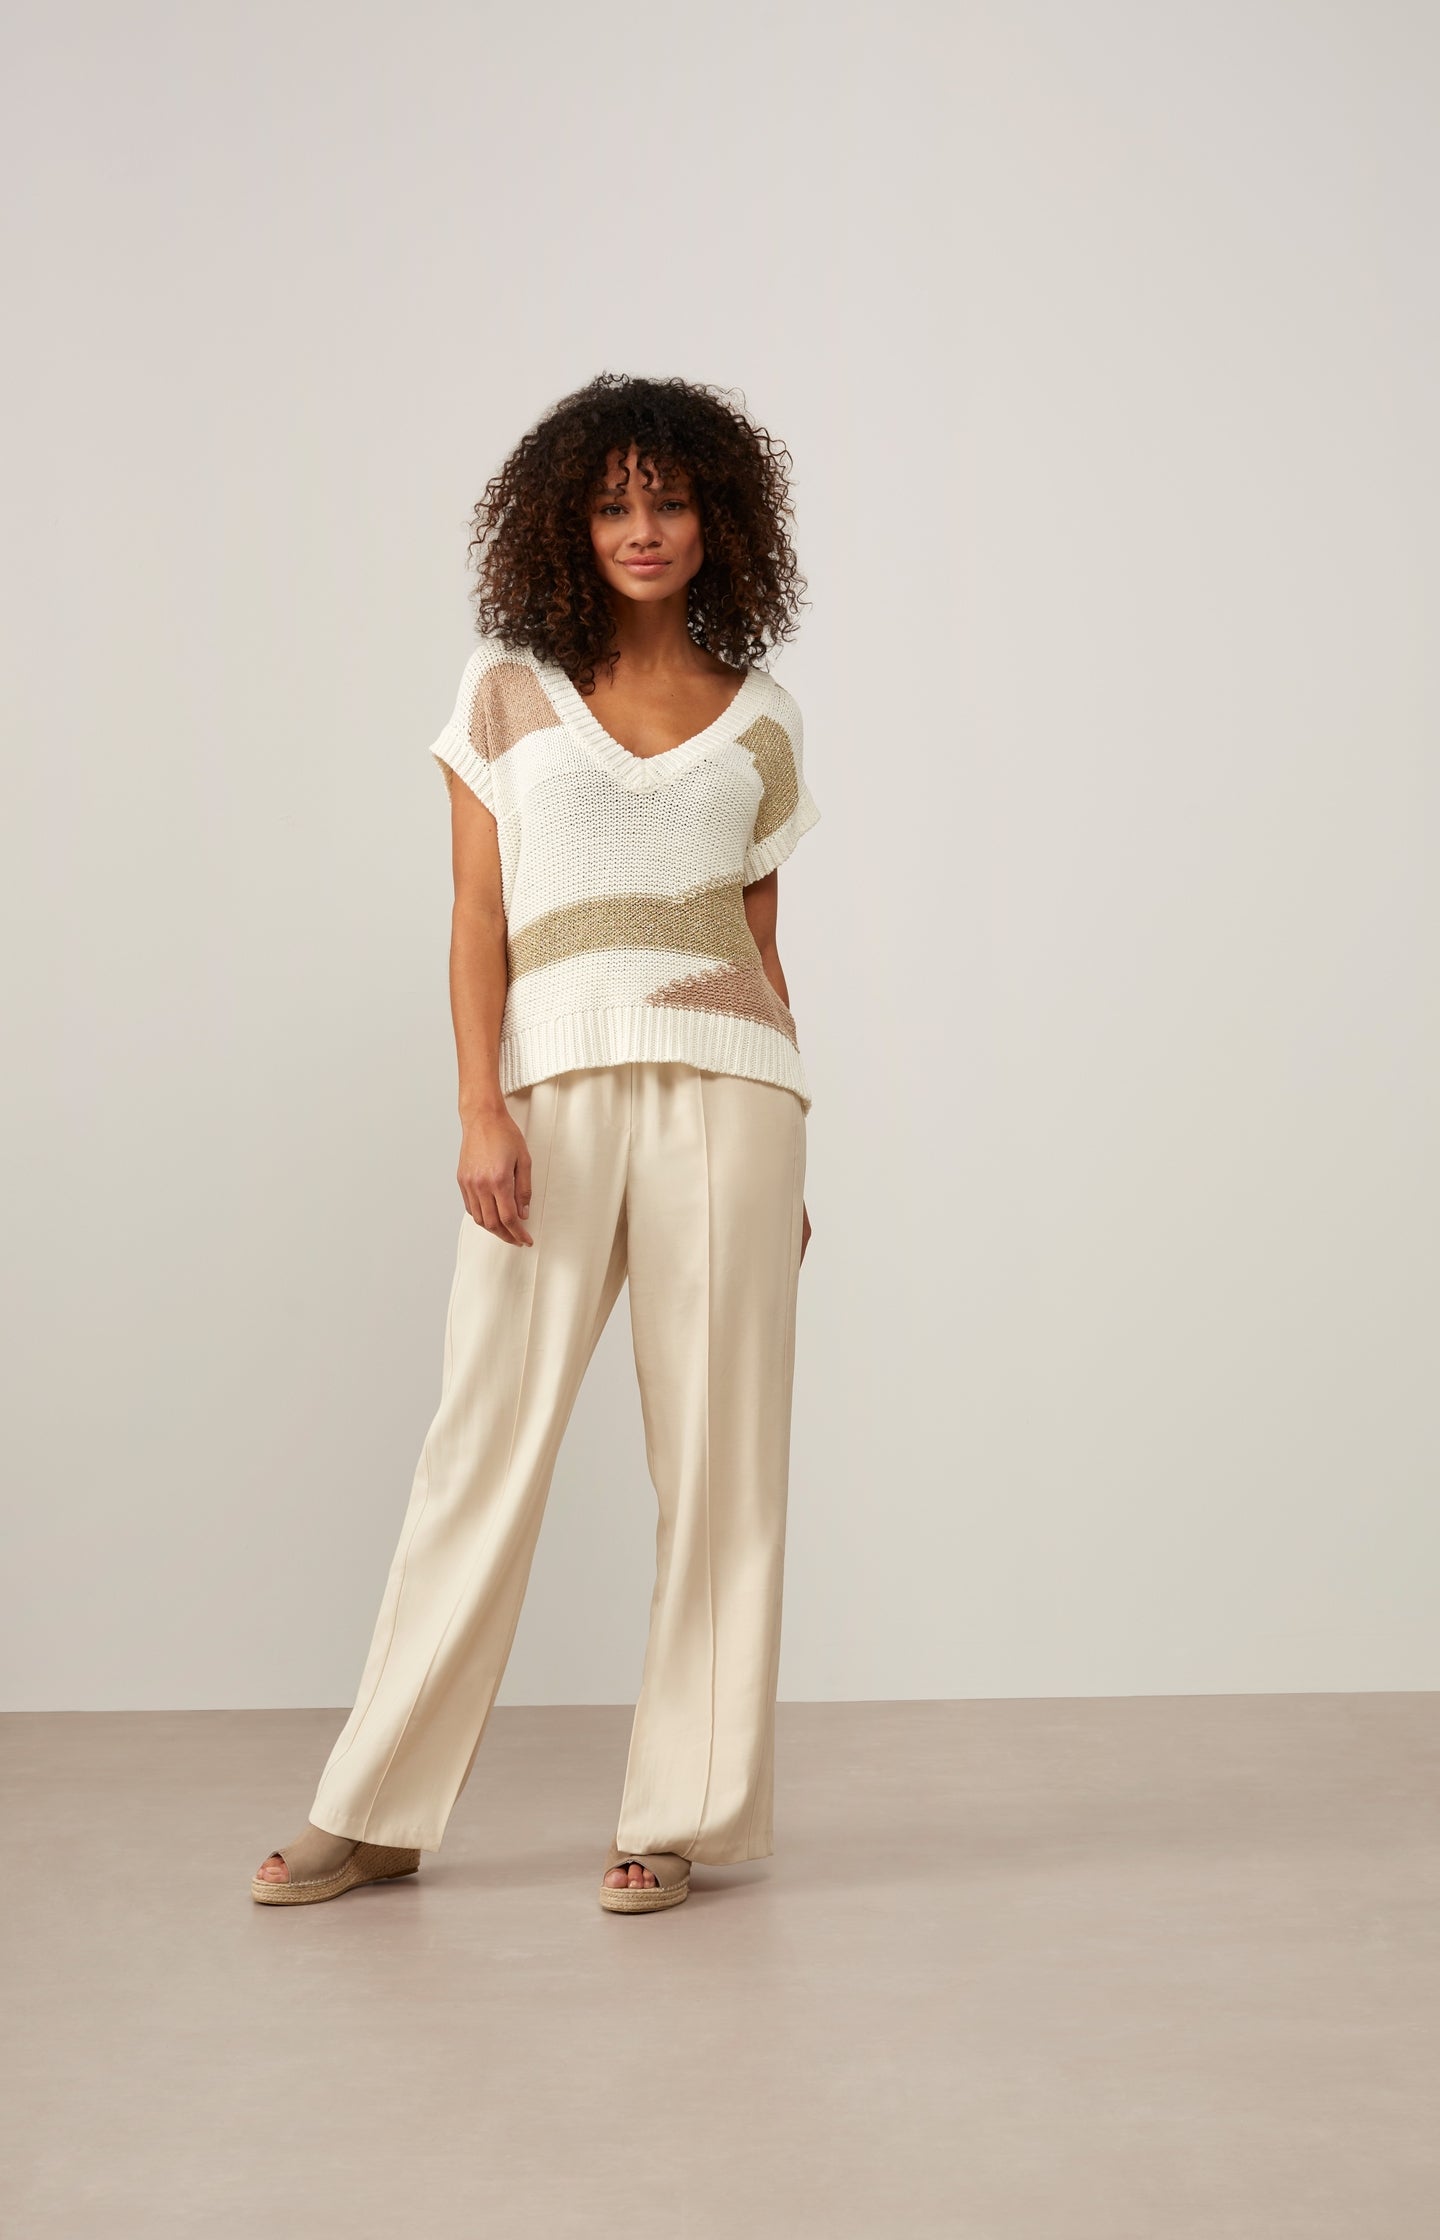 Wide leg trousers, side pockets, pintucks and a slit